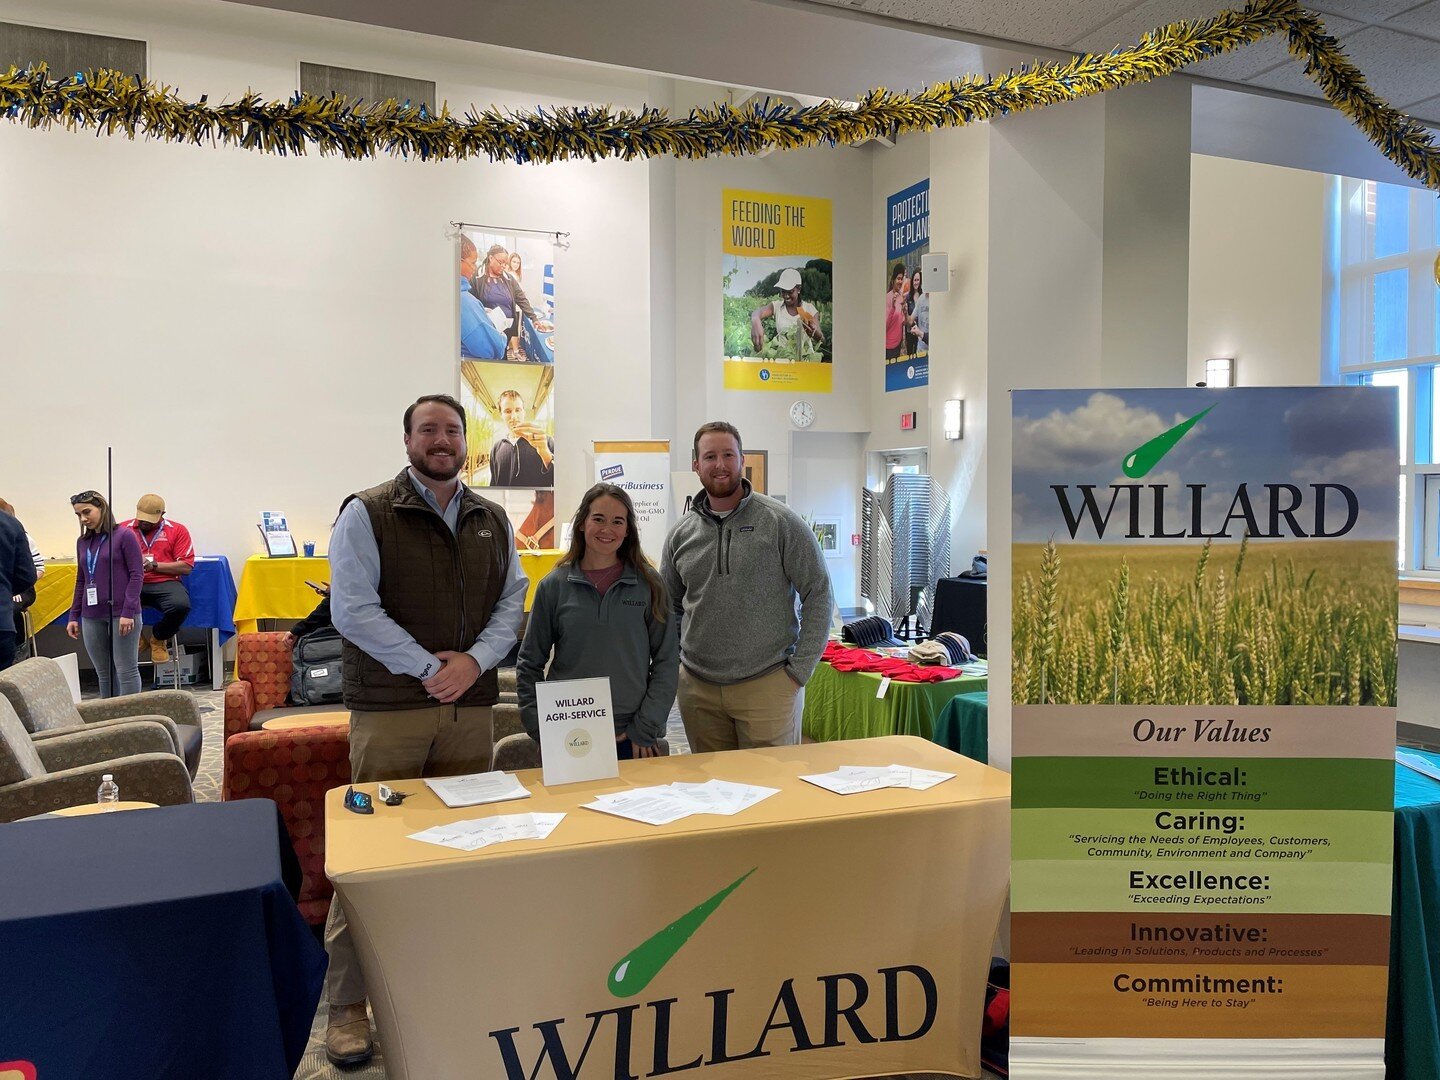 🐔💼 Abel, Casey, and Cole joined the flock of future professionals at the University of Delaware Career Fair and networked with the coolest crew around !  Our 2022 intern, Maci, popped in for a pic too!
.
.
.
#agriculture #agriculturelife #agricultu